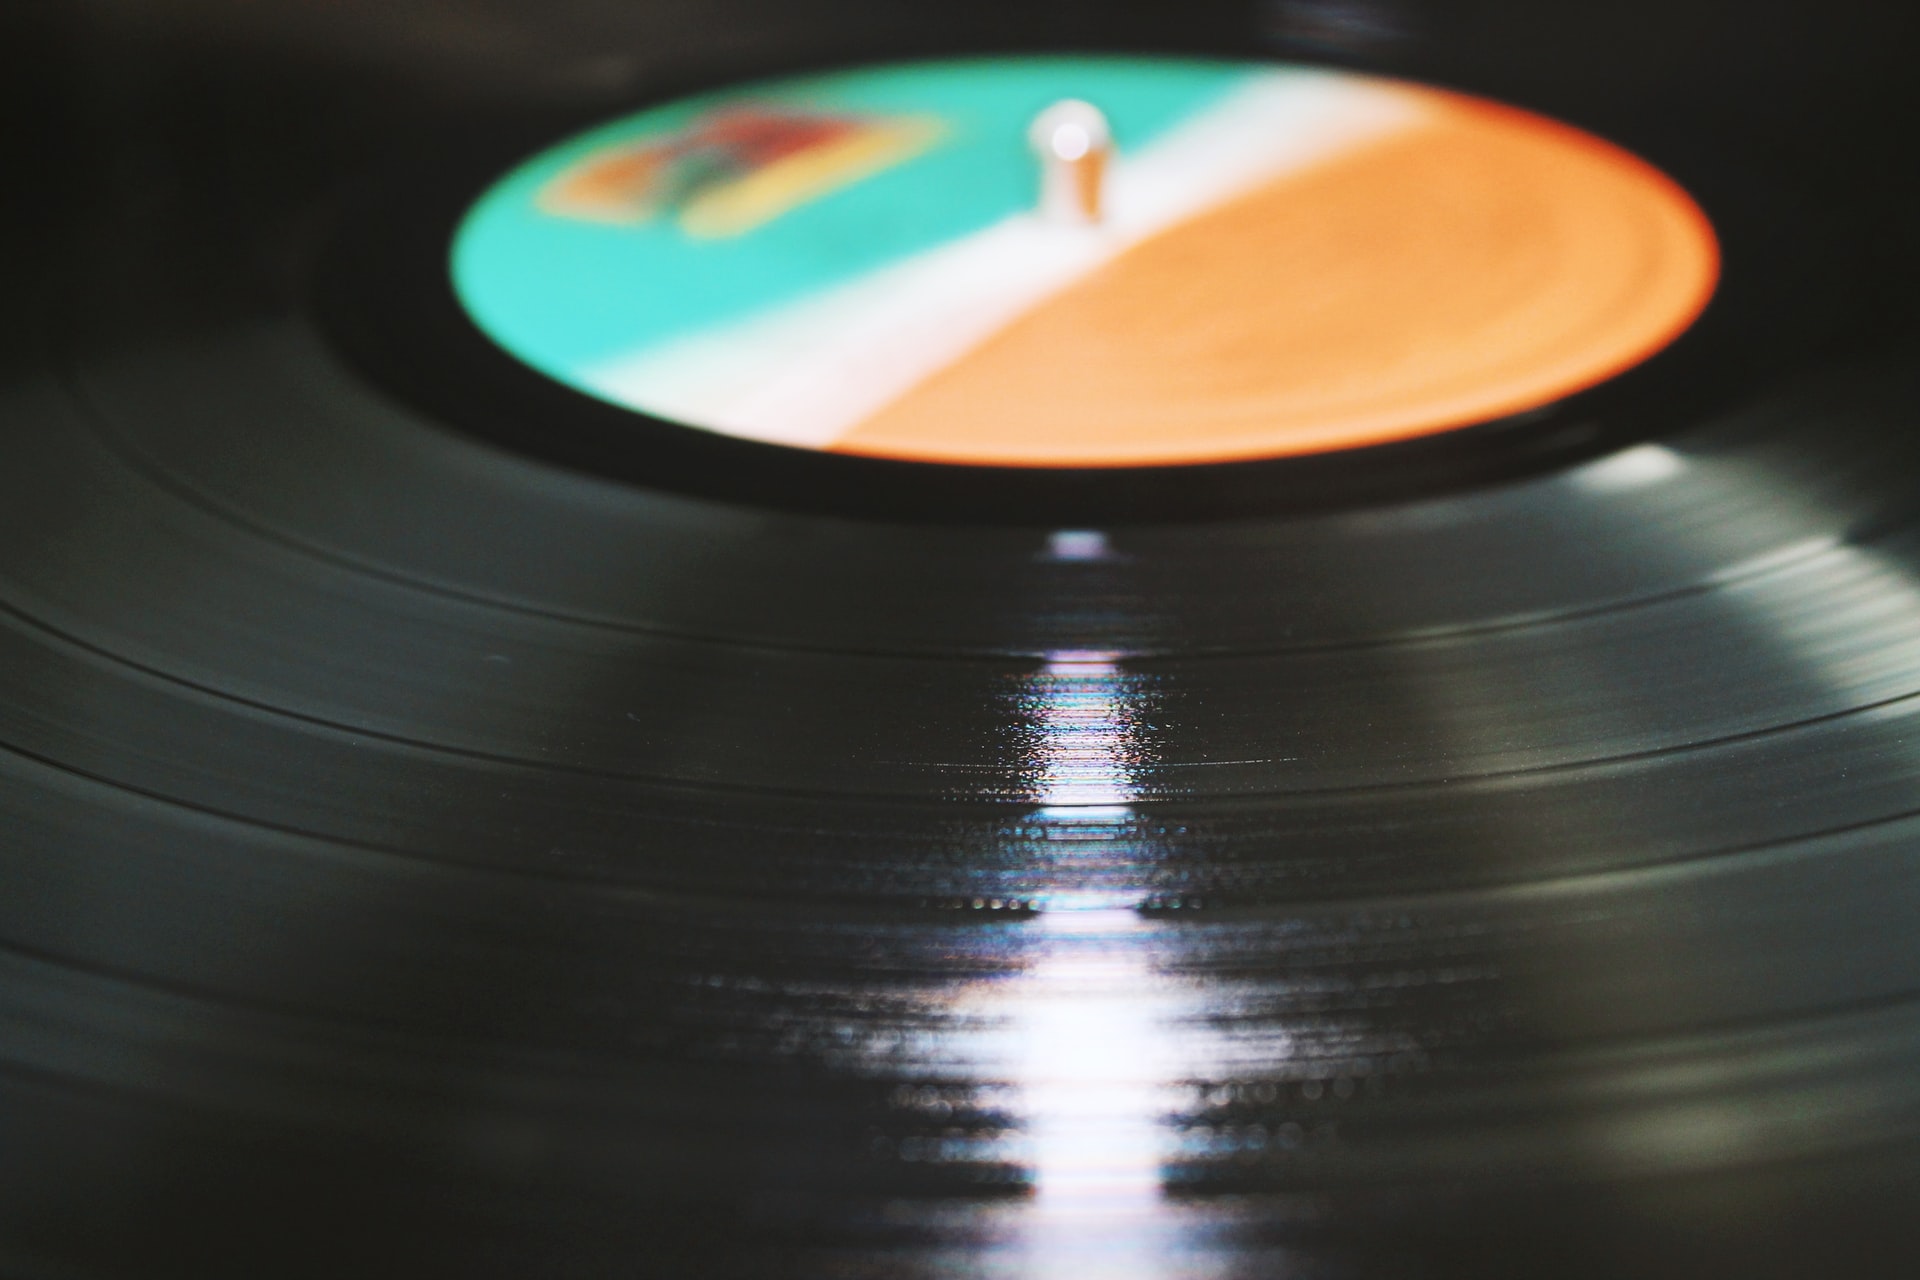 On The Record: An Audio Professional's Take on Vinyl - Aesthetics for Birds